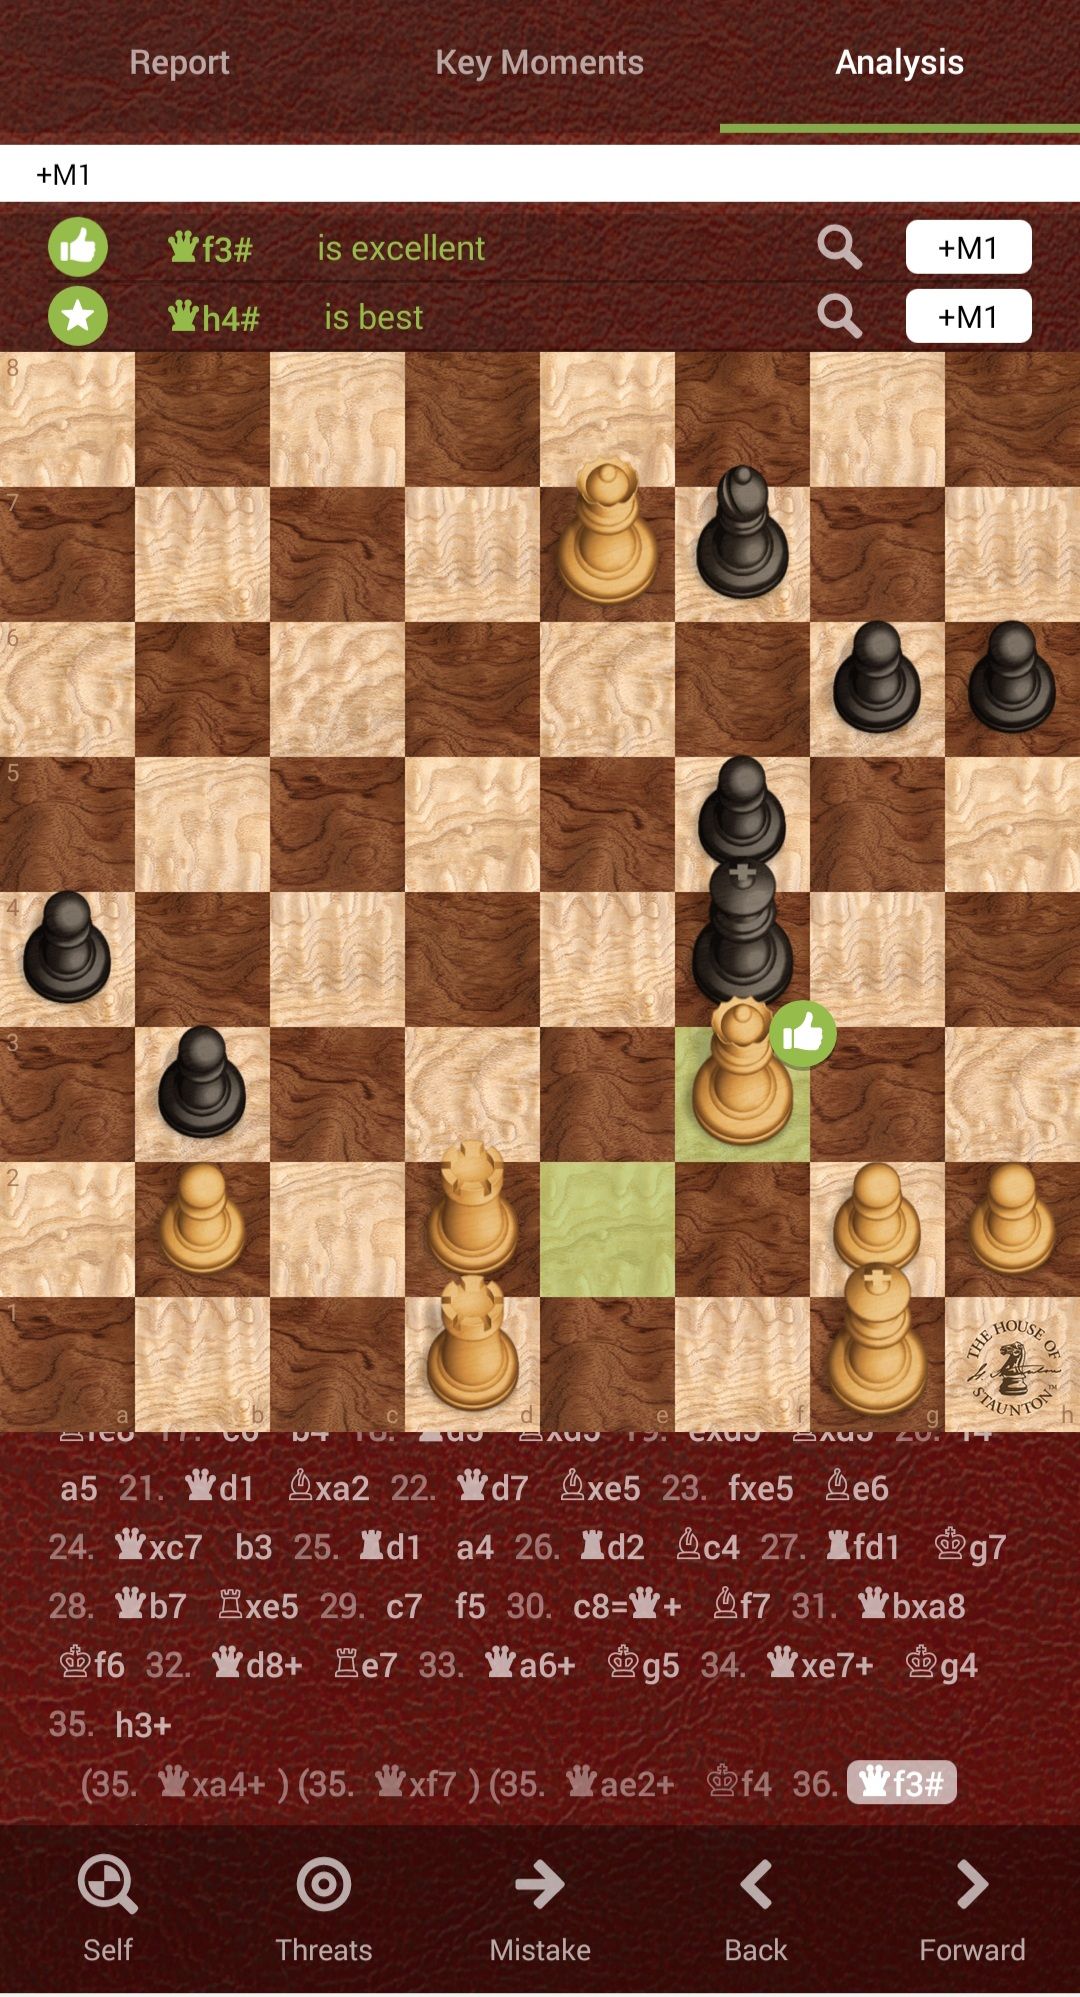 36 Checkmate Patterns That All Chess Players Should Know